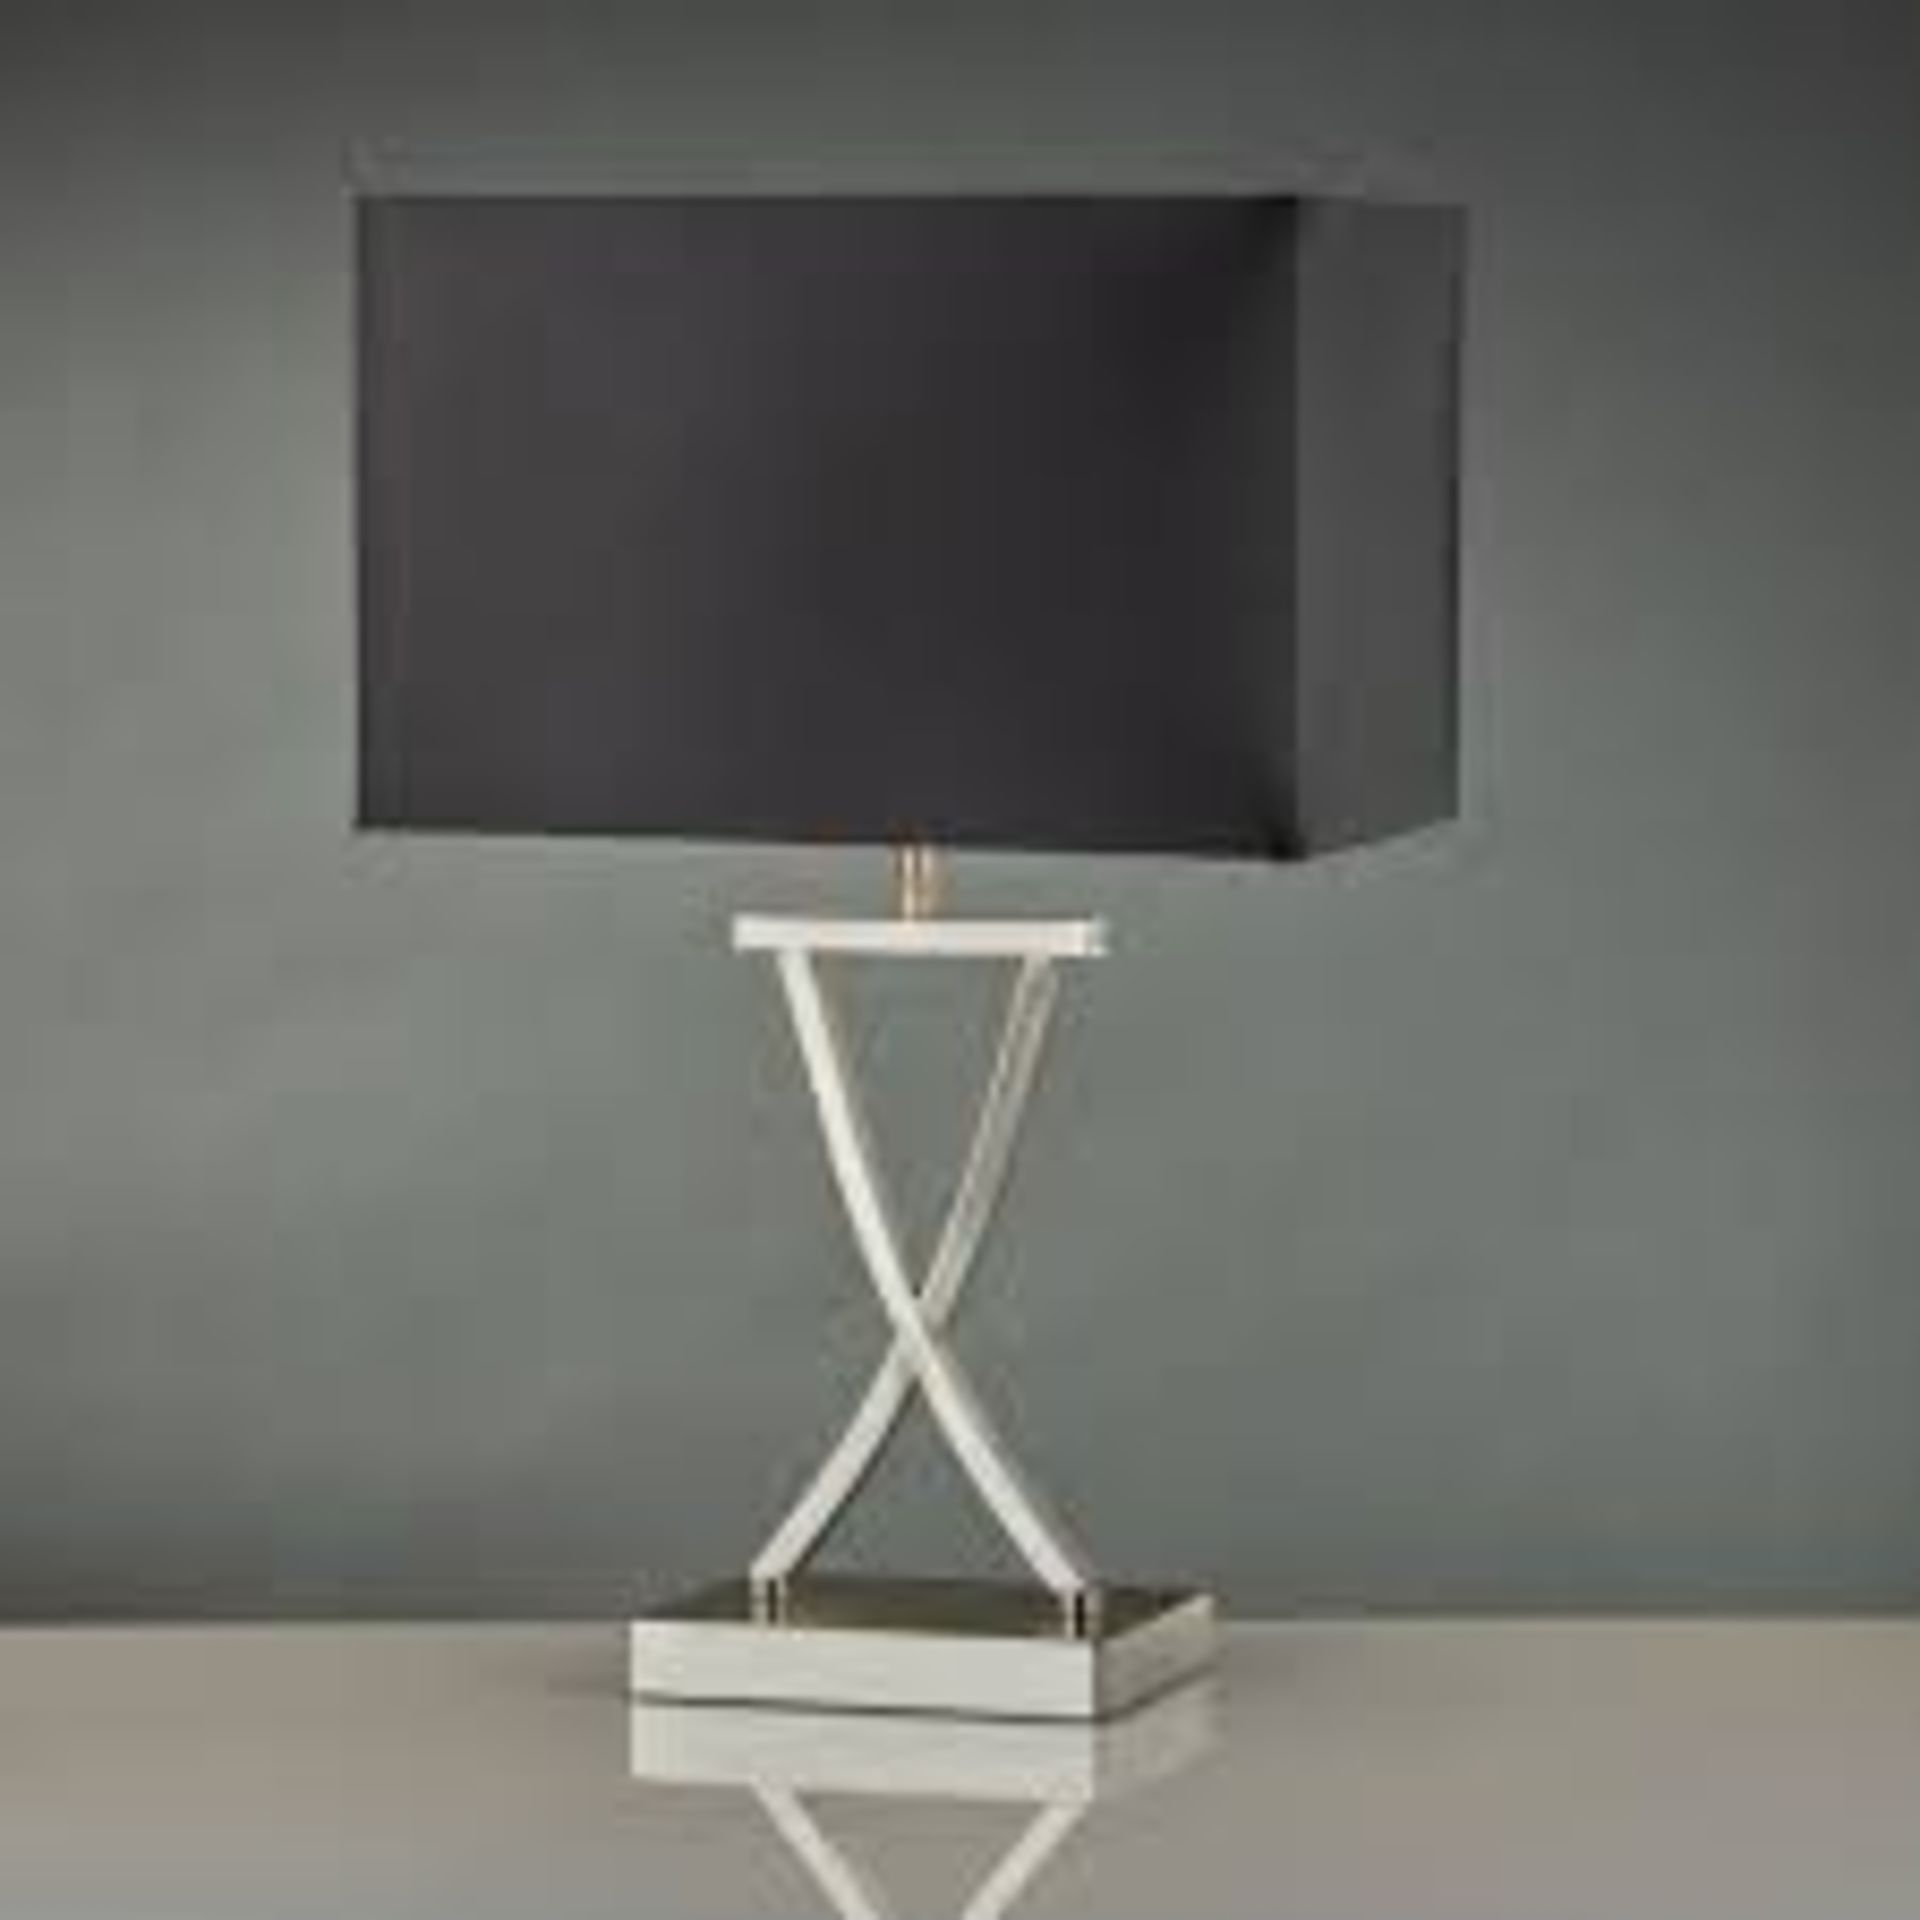 1 x Searchlight X Base Table Lamp in satin silver - Ref: 7923SS - New and Boxed - RRP: £70 - Image 4 of 4